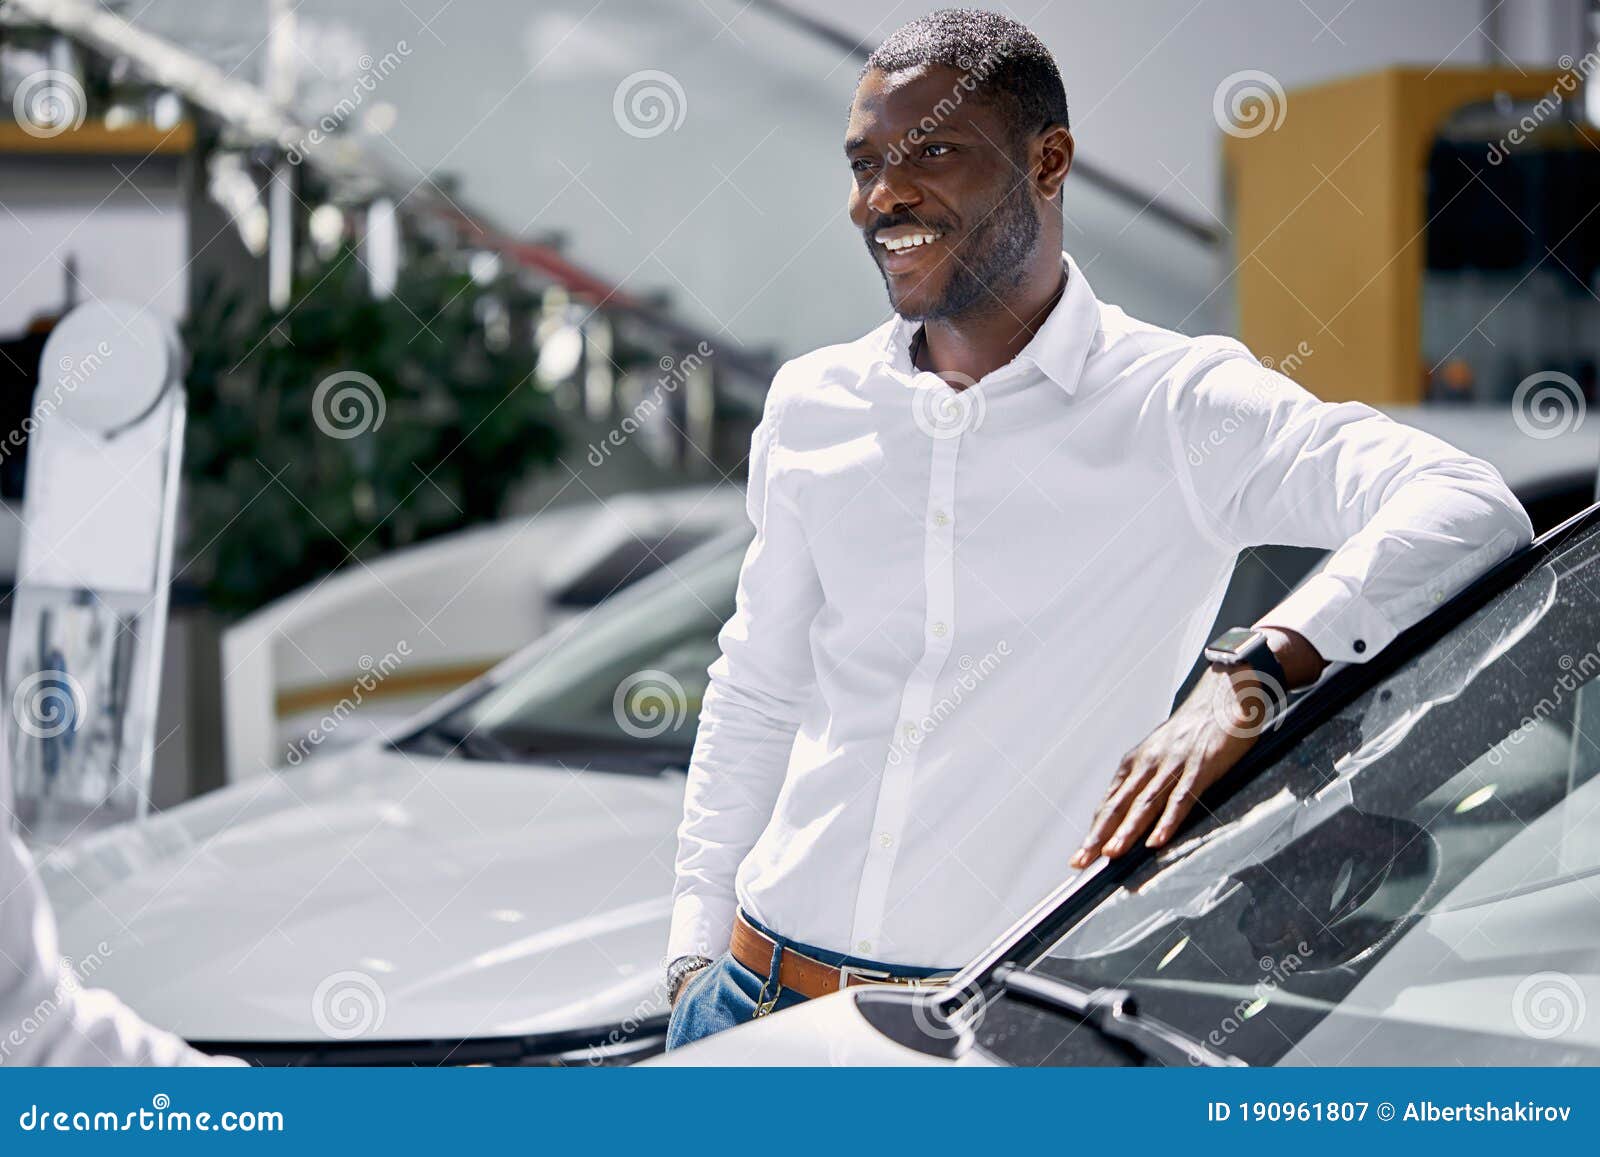 africanamerican man came to see automobiles in dealership